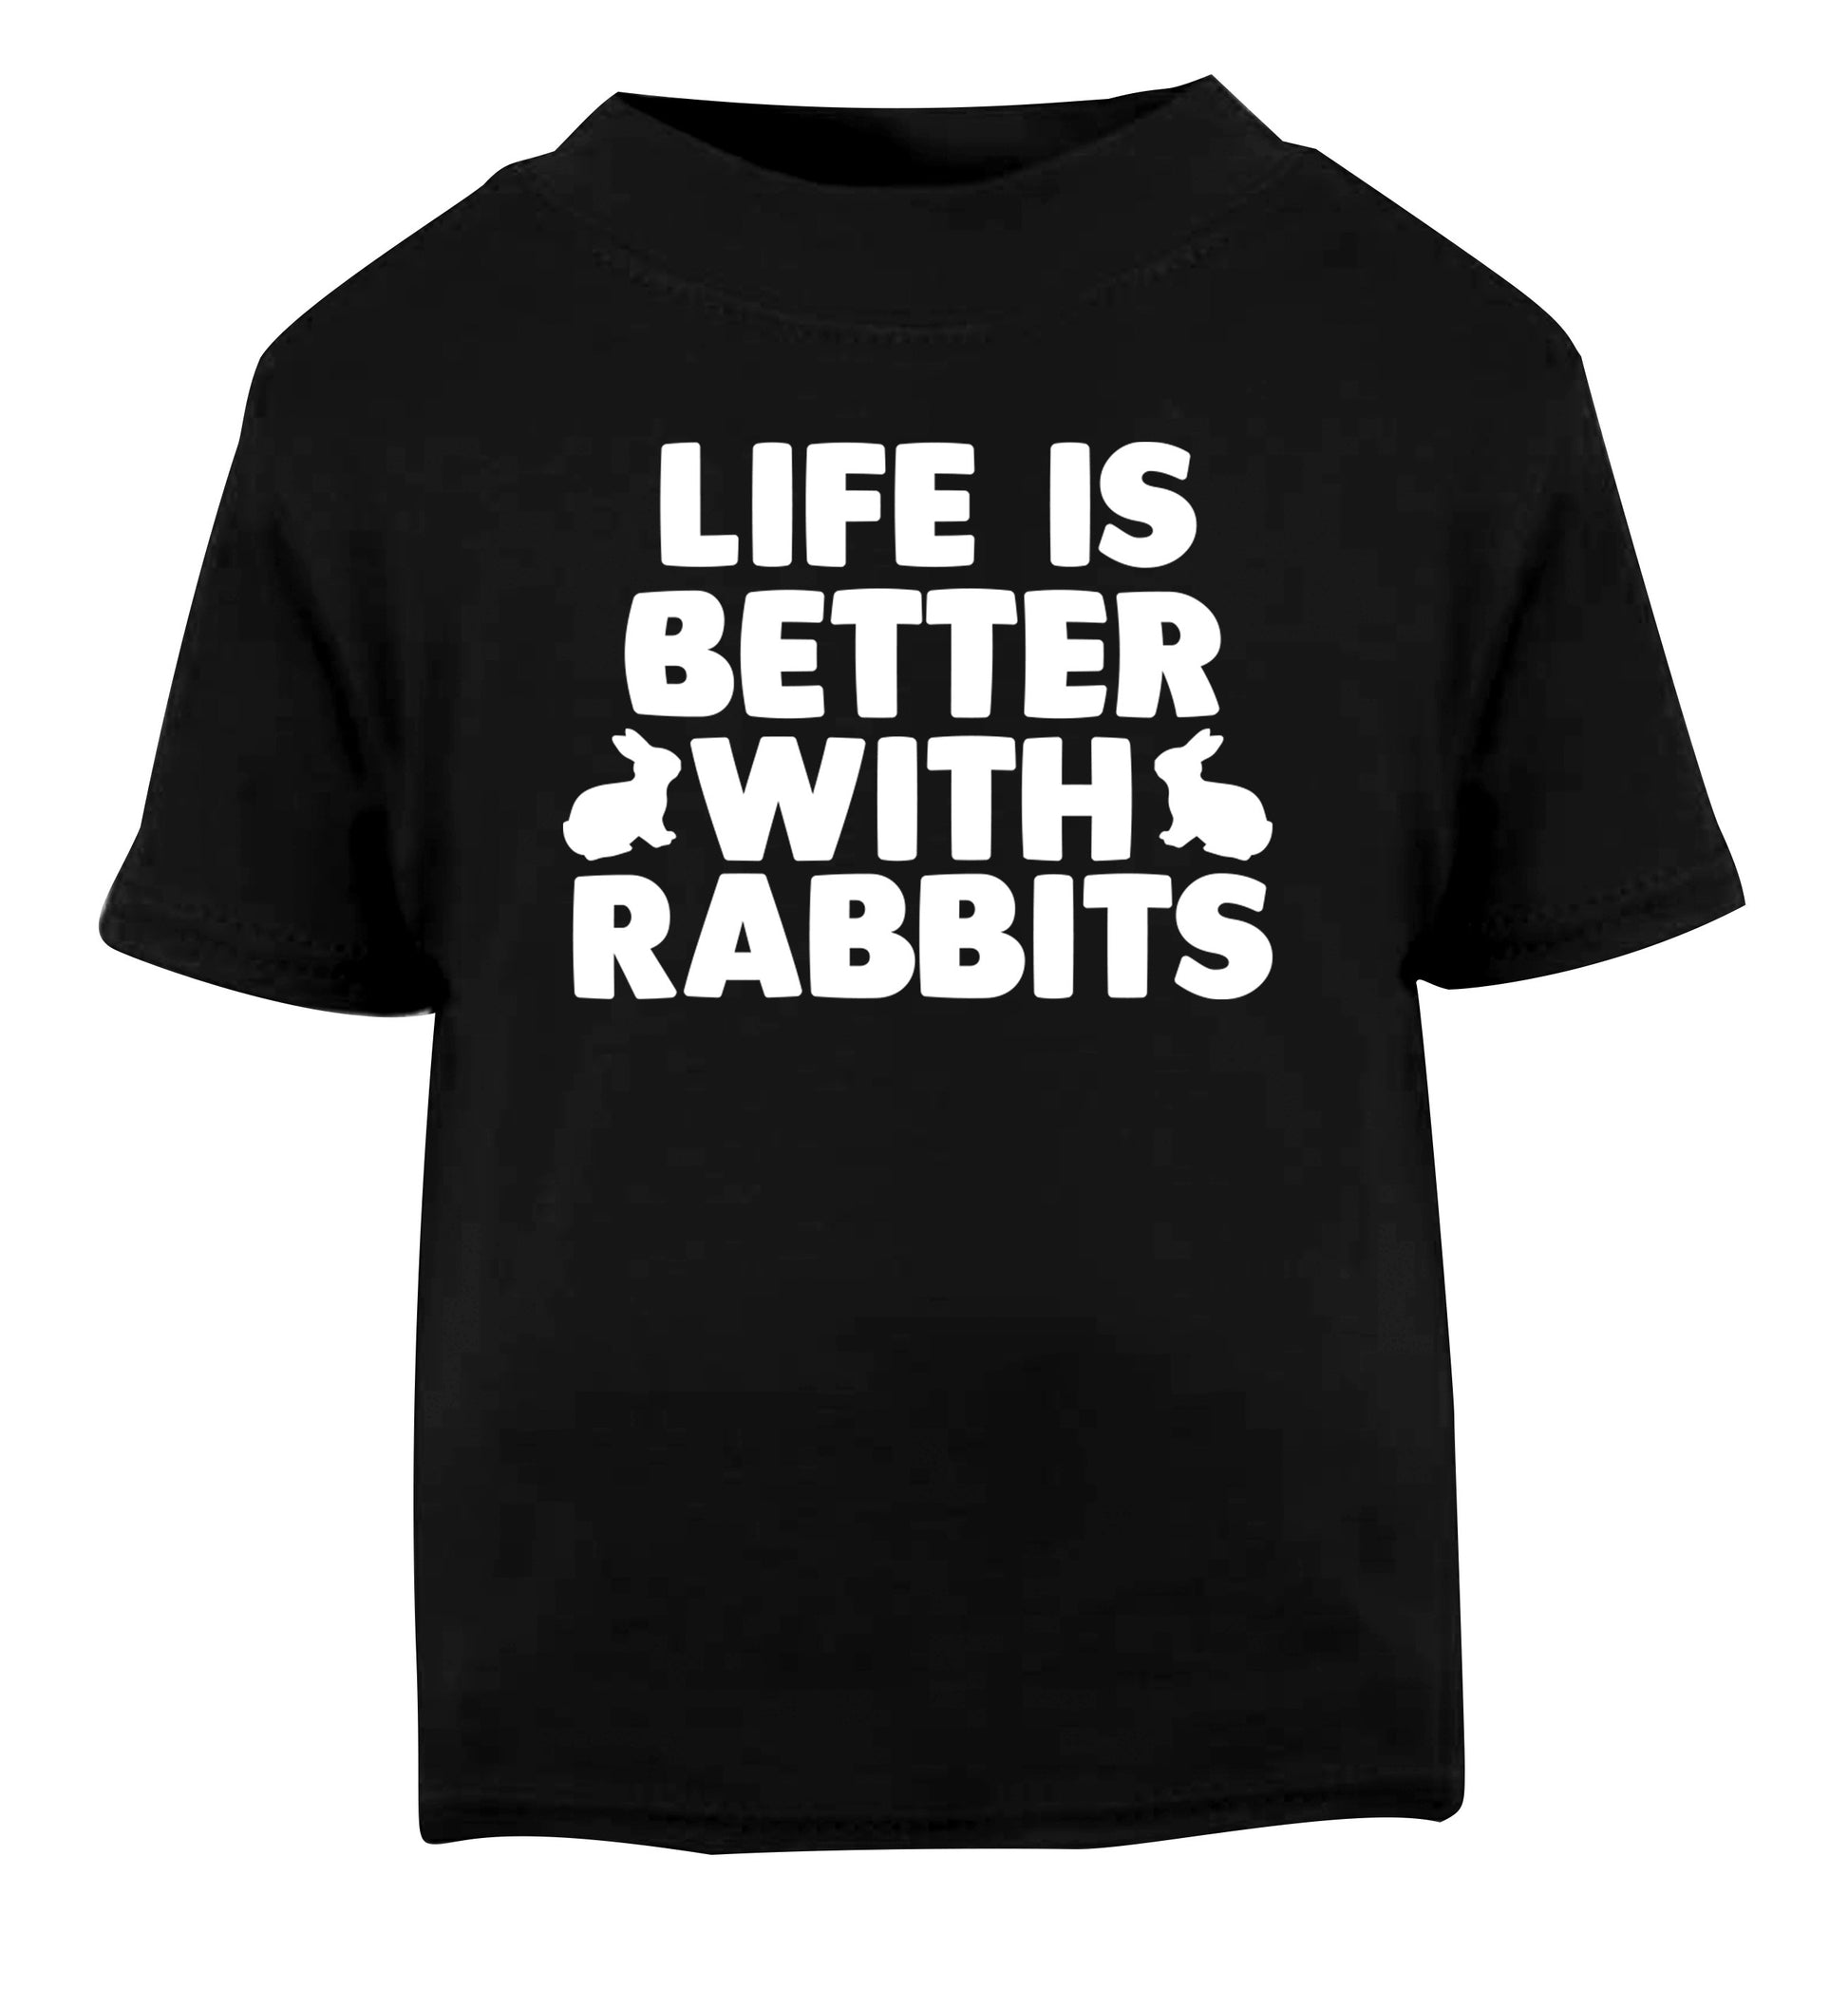 Life is better with rabbits Black Baby Toddler Tshirt 2 years